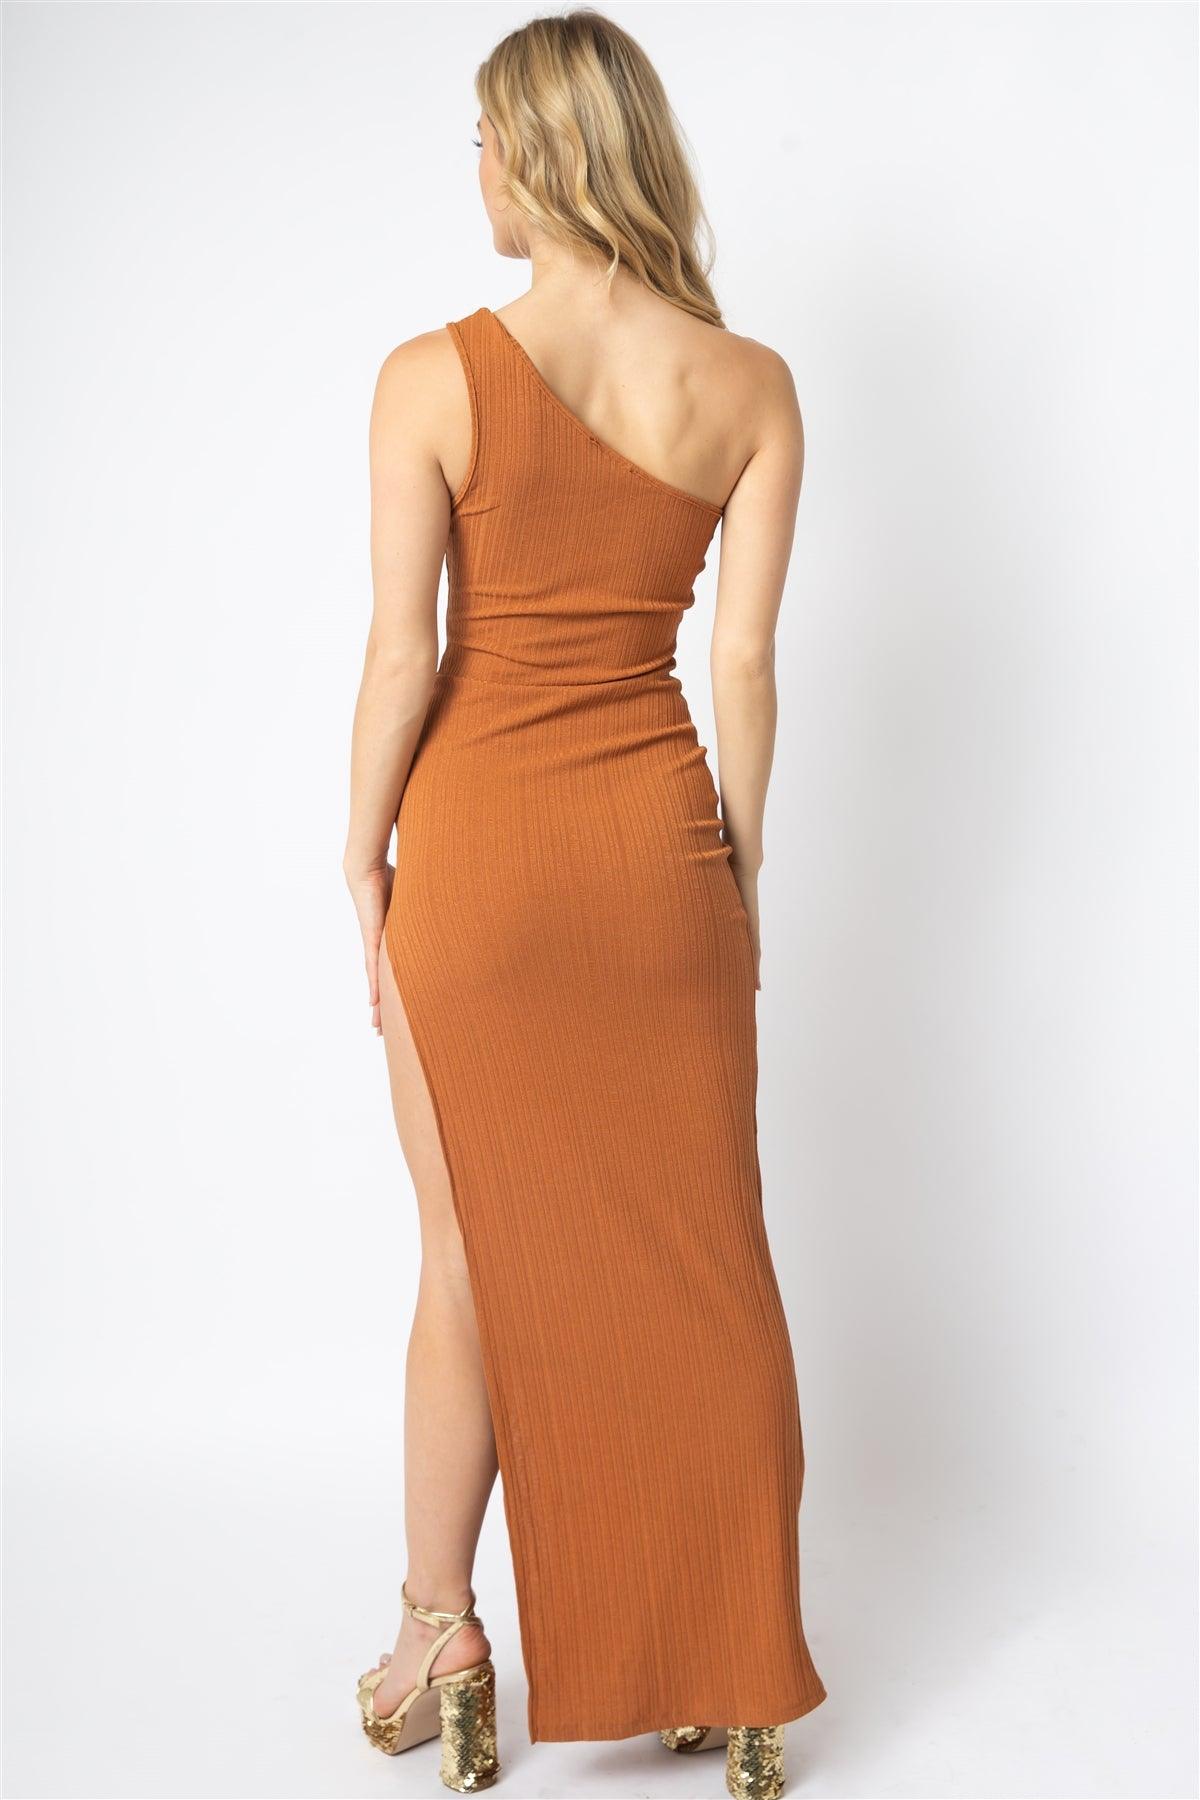 Lexie Rust Ribbed One Shoulder Maxi Dress /2-3-2-1